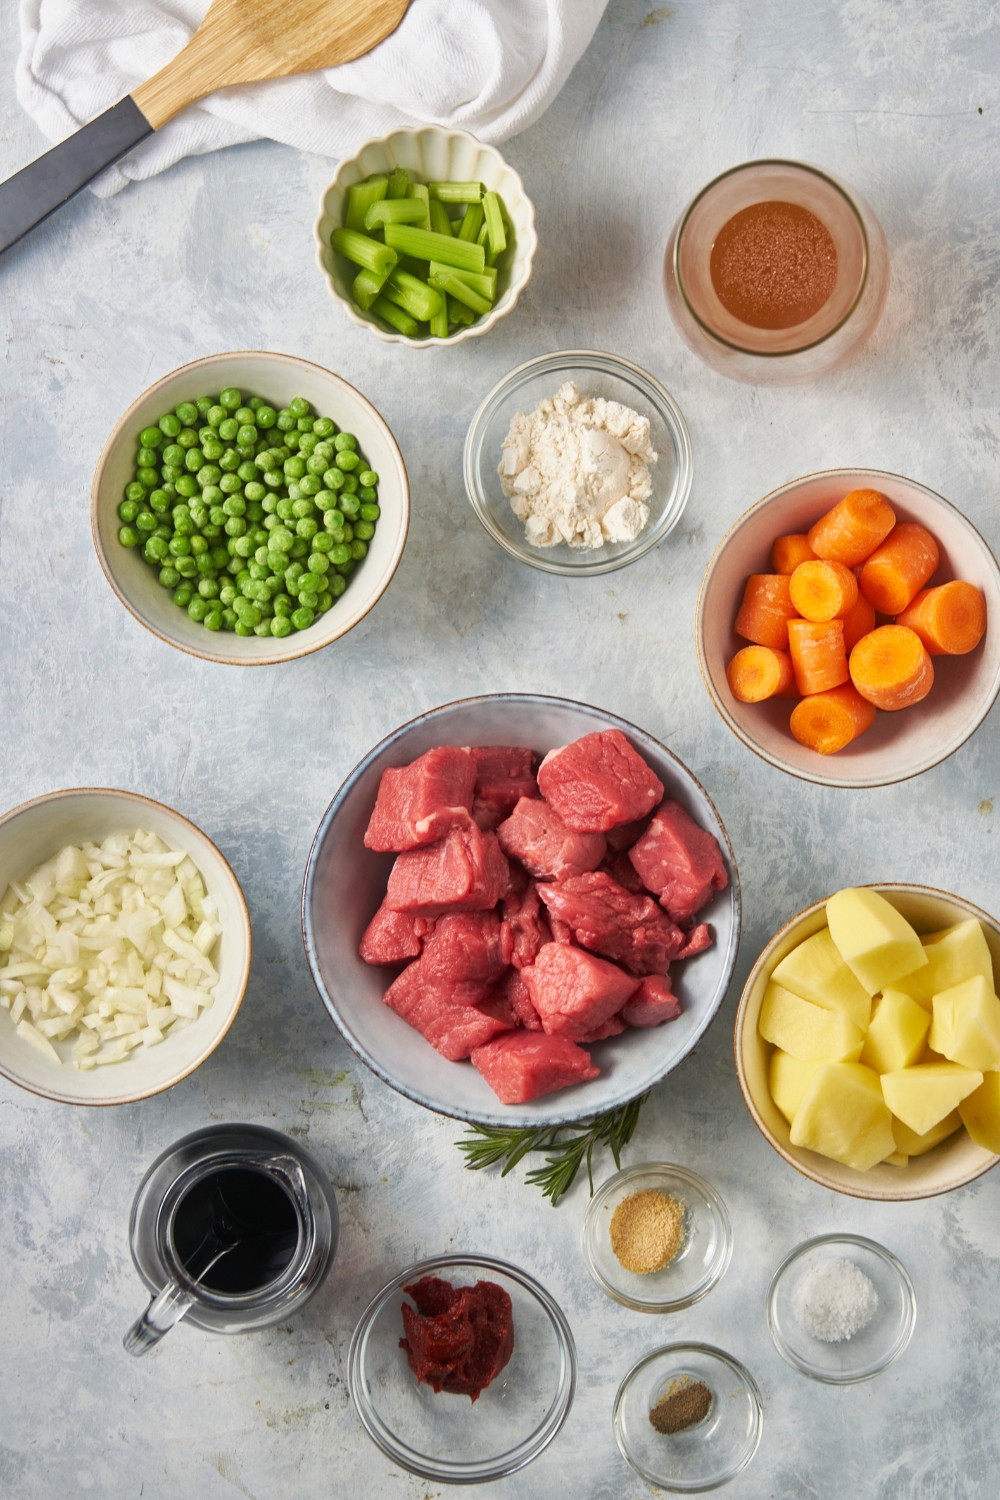 A bowl of stew meat pieces, a bowl of chopped carrots, a bowl of potato chunks, and a bowl of peas all on a grey counter.